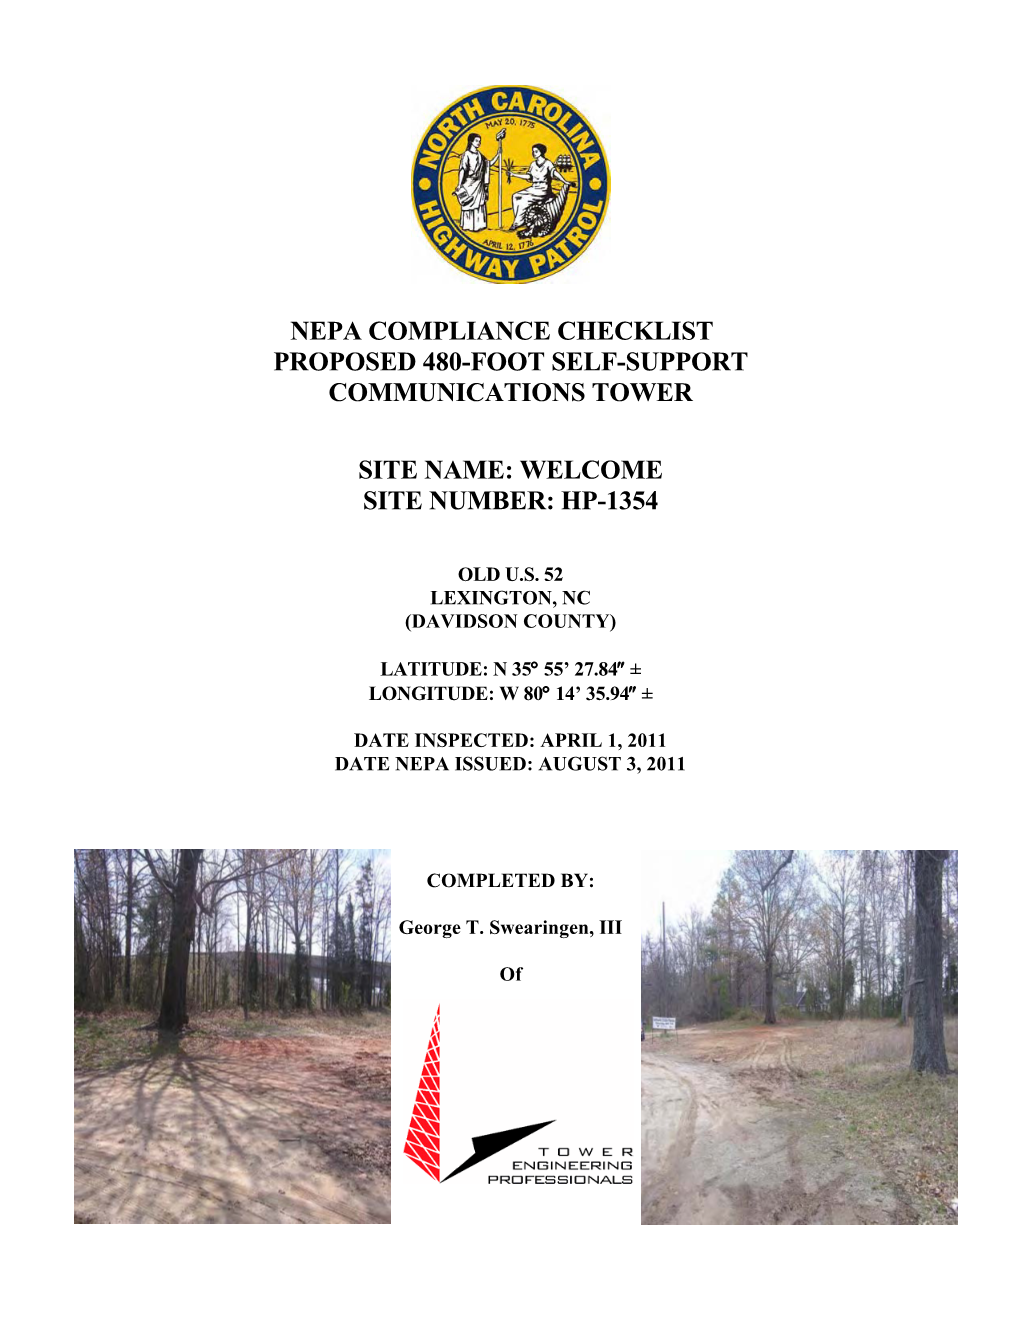 Nepa Compliance Checklist Proposed 480-Foot Self-Support Communications Tower Site Name: Welcome Site Number: Hp-1354